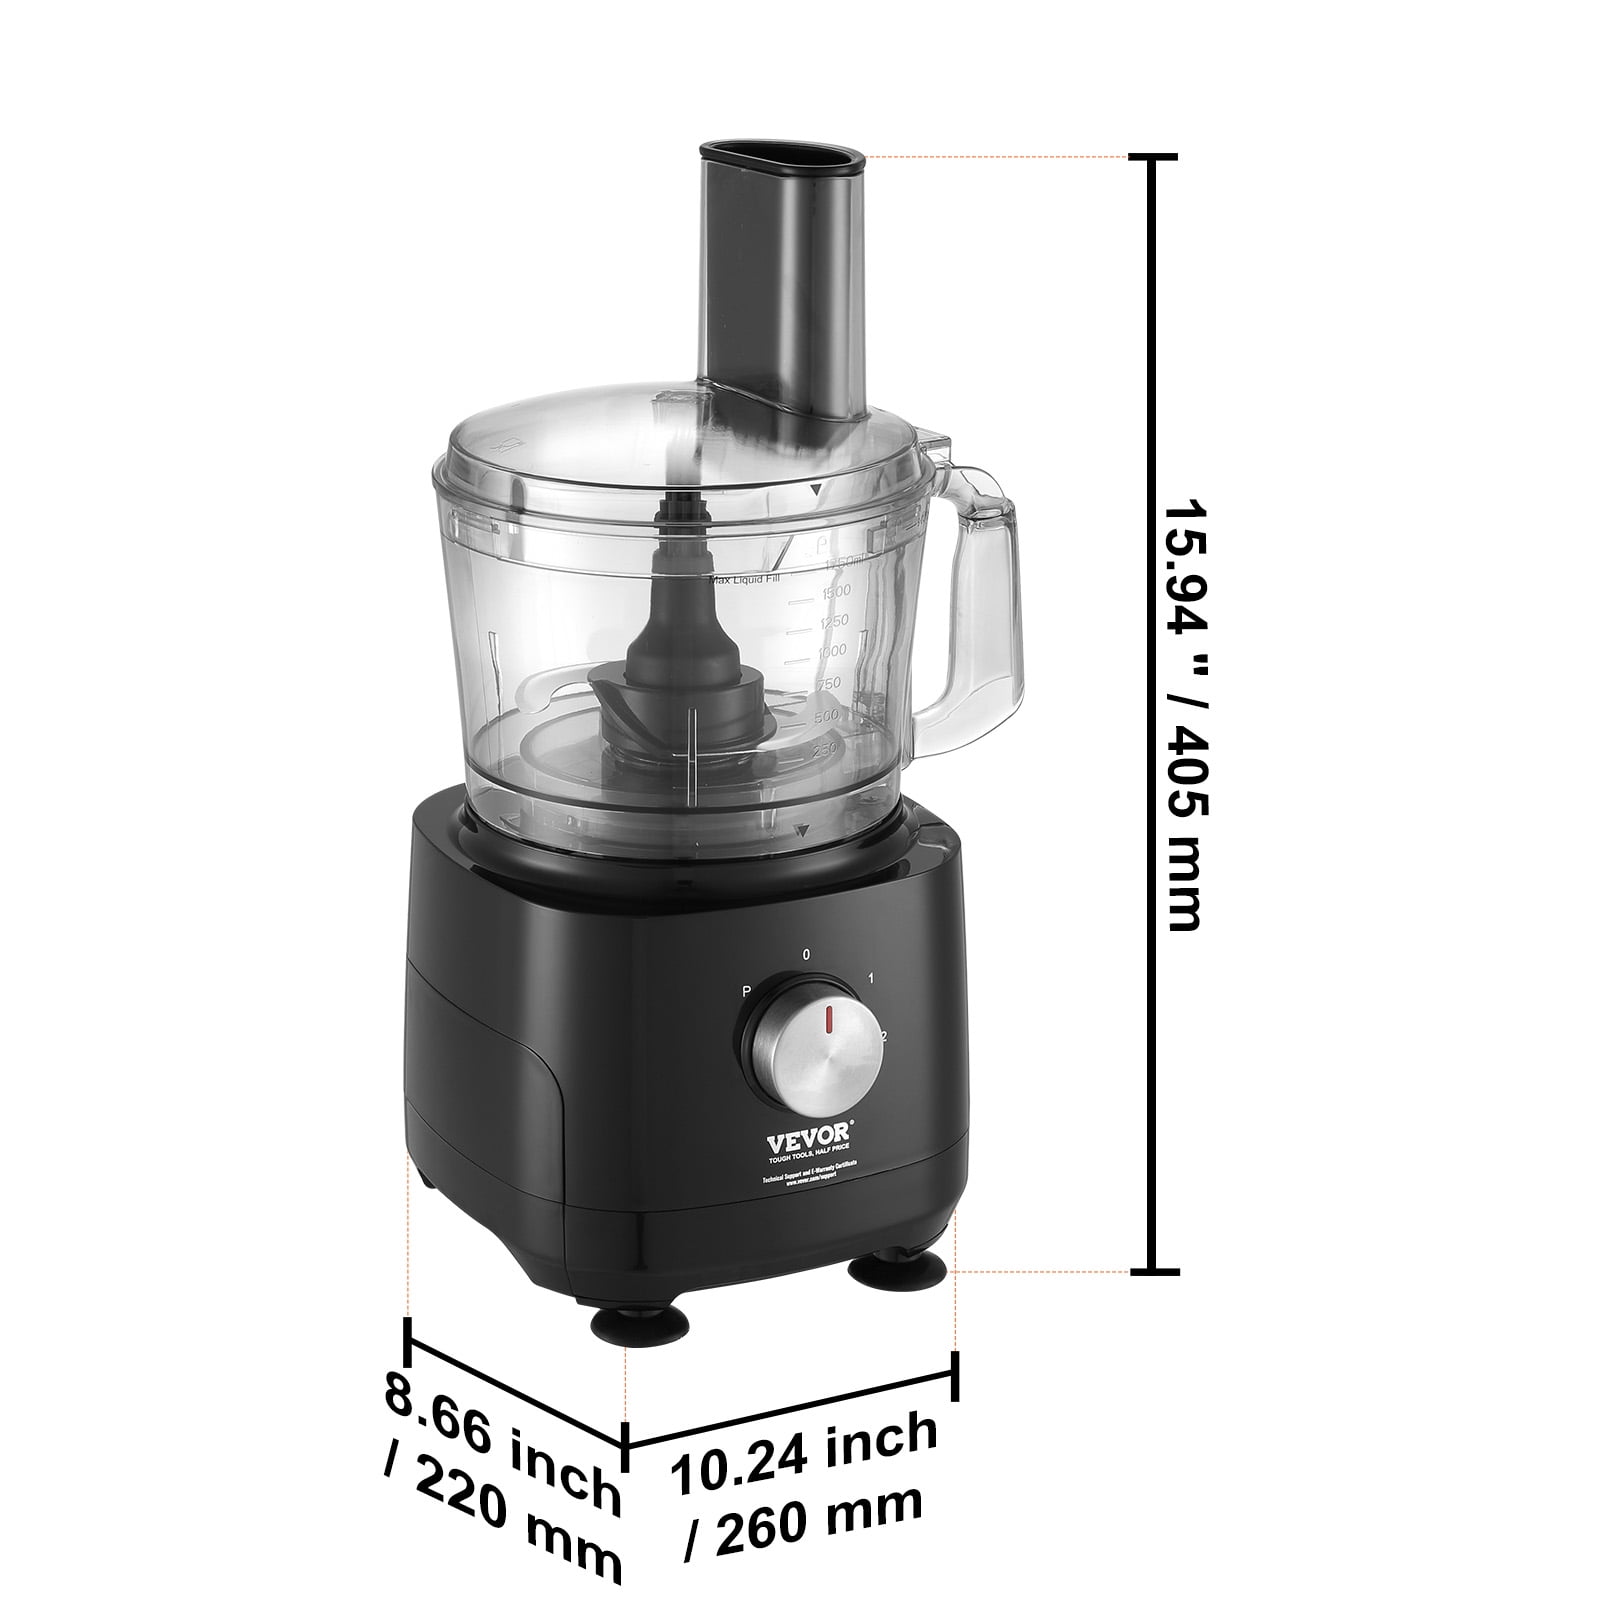  Food Processor, Anthter 600W Professional Food Processors &  Vegetable Chopper, with 7 Processor Cups, Reversible Disc, Chopping Blade &  Dough Blade for Chopping, Slicing, Purees & Dough: Home & Kitchen